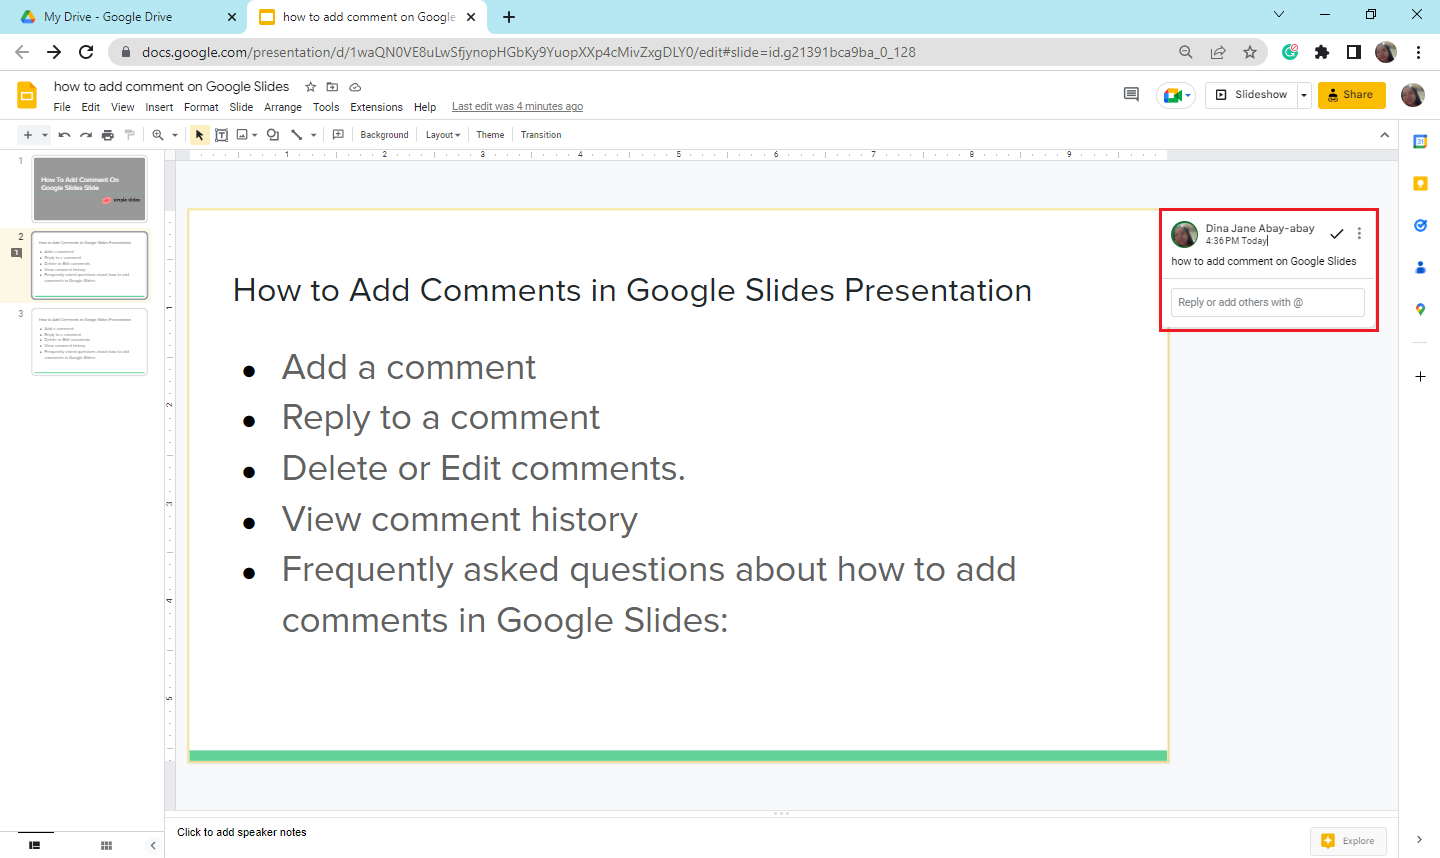 In the existing comments on your Google Slides